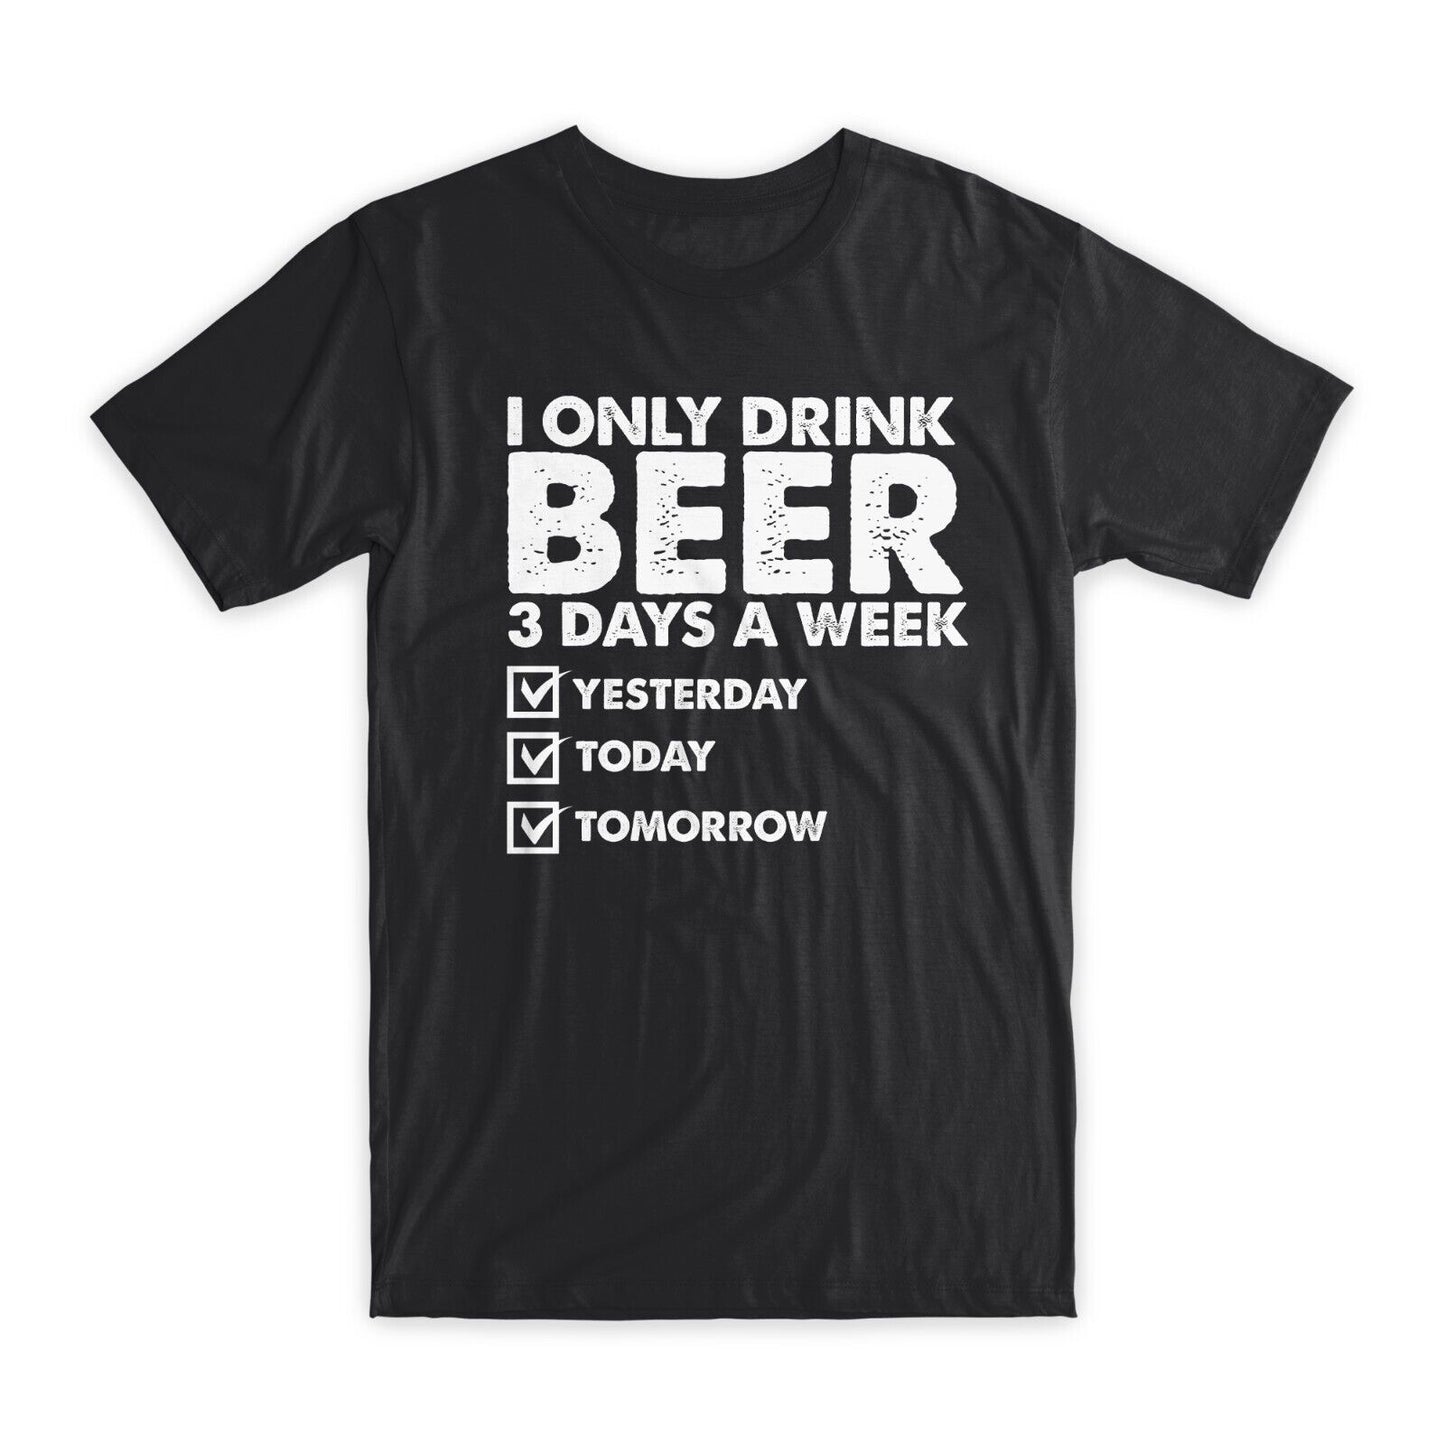 I Only Drink Beer 3 Days A Week T-Shirt Premium Soft Cotton Funny Tees Gift NEW